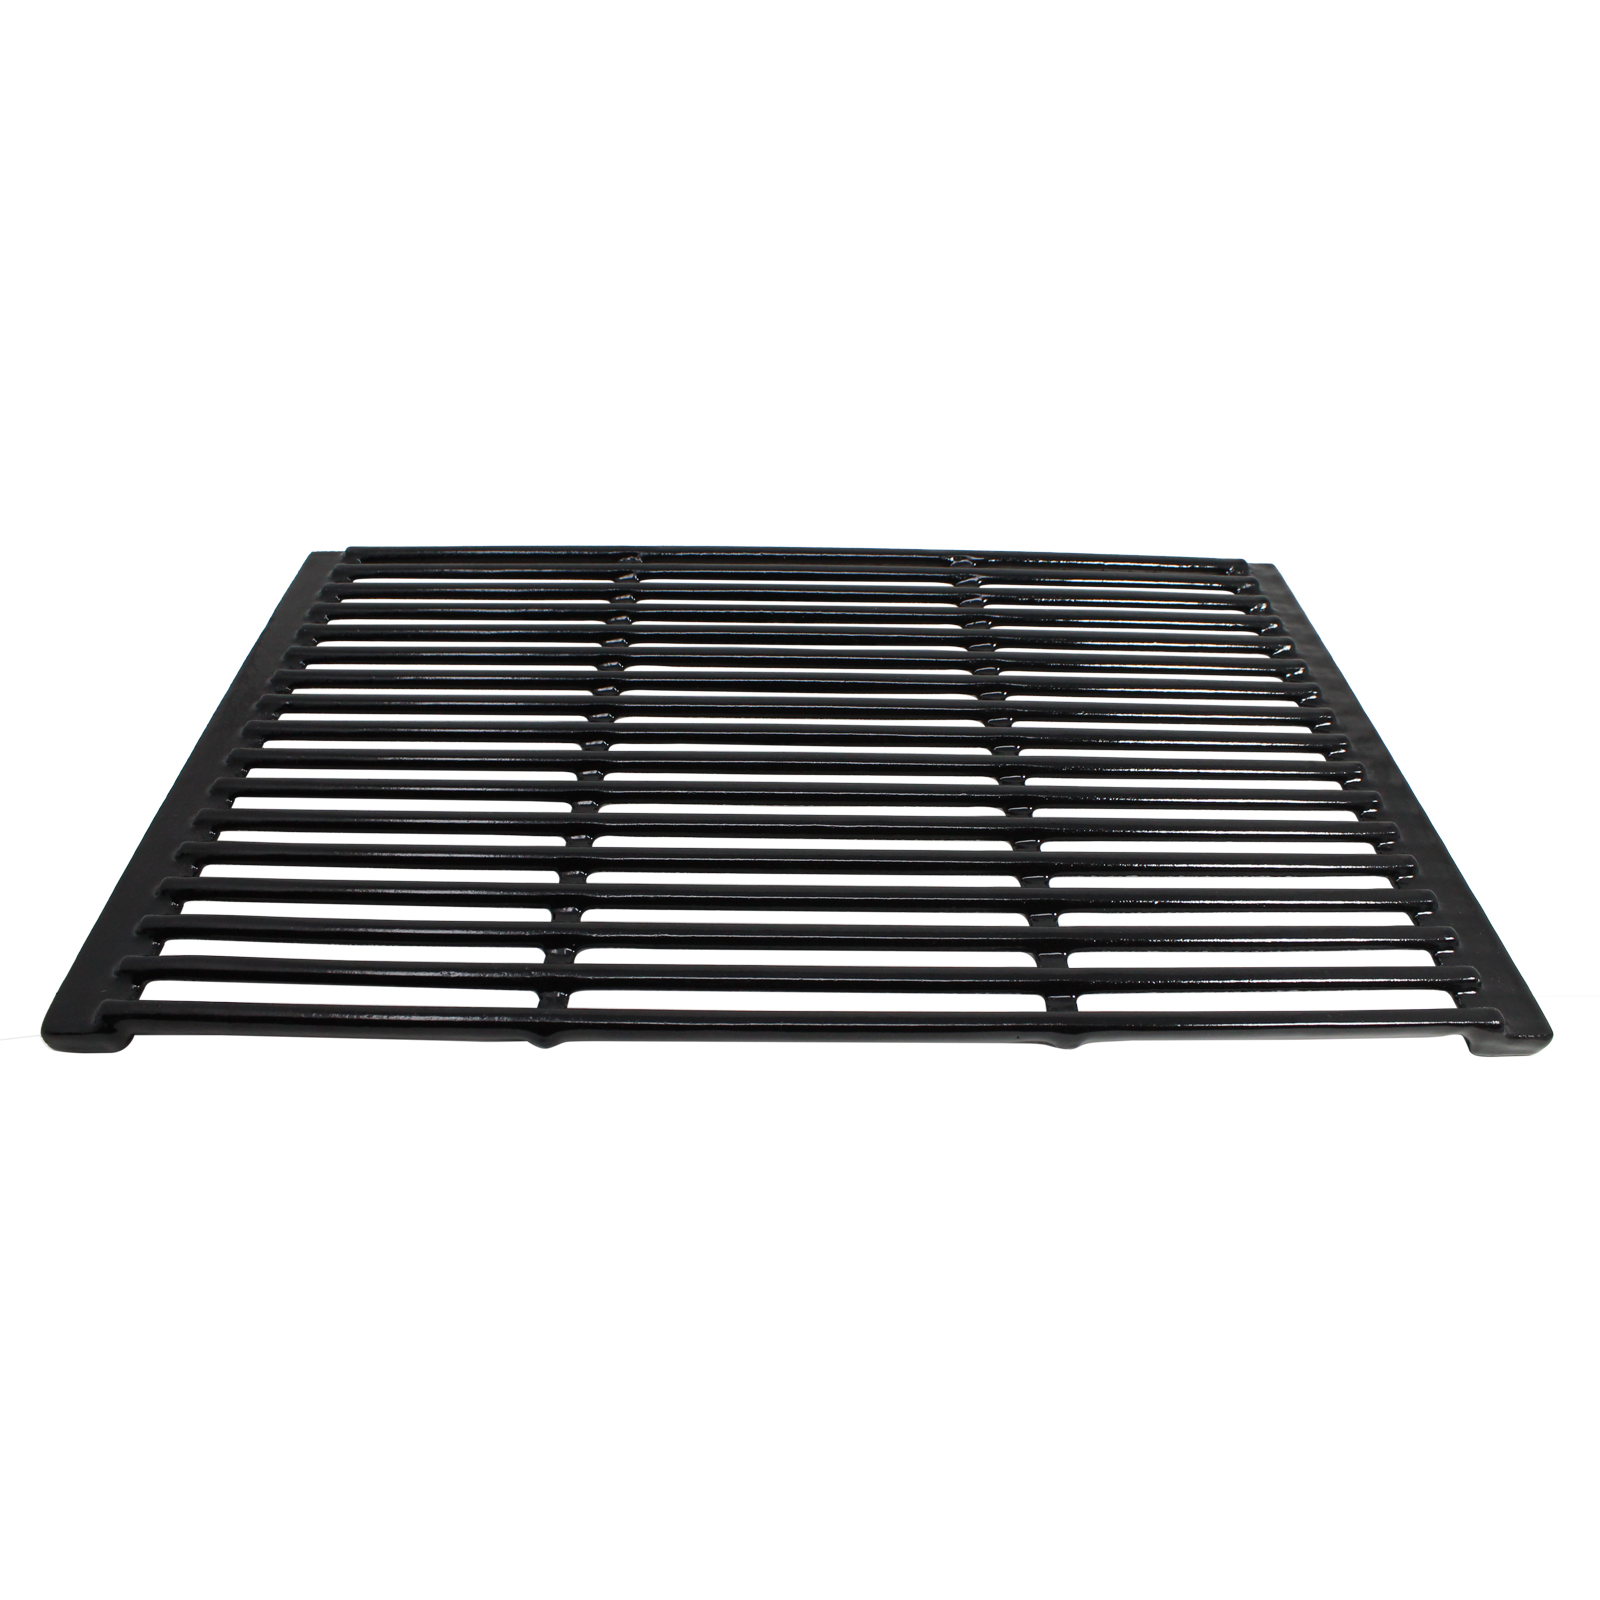 BBQ Grill Cooking Grates Replacement Parts for Brinkmann 810-8401-S - Compatible Barbeque Porcelain Enameled Cast Iron Grid 19" - image 3 of 4